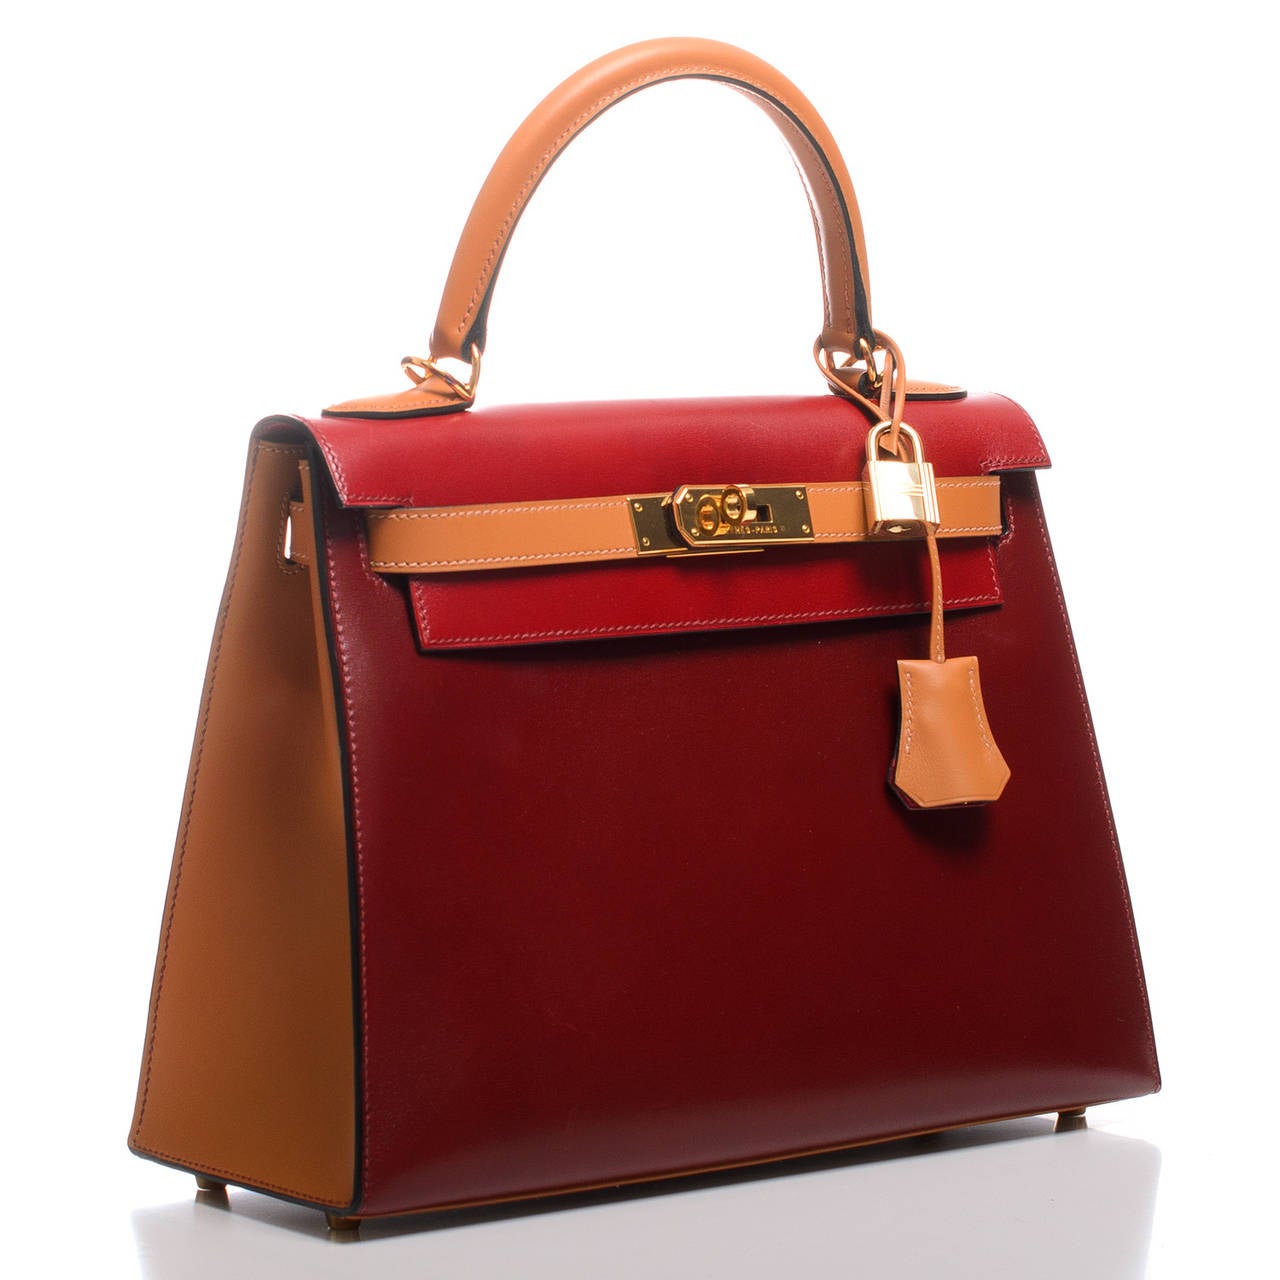 Hermes tri-color Kelly Sellier 28cm of Rouge H, Rouge Vif and Gold box leather with gold hardware.

The Hermes Kelly bag, like its sister bag -- the Birkin -- is a coveted and scarce bag. Like its muse, Grace Kelly, this bag is the definition of